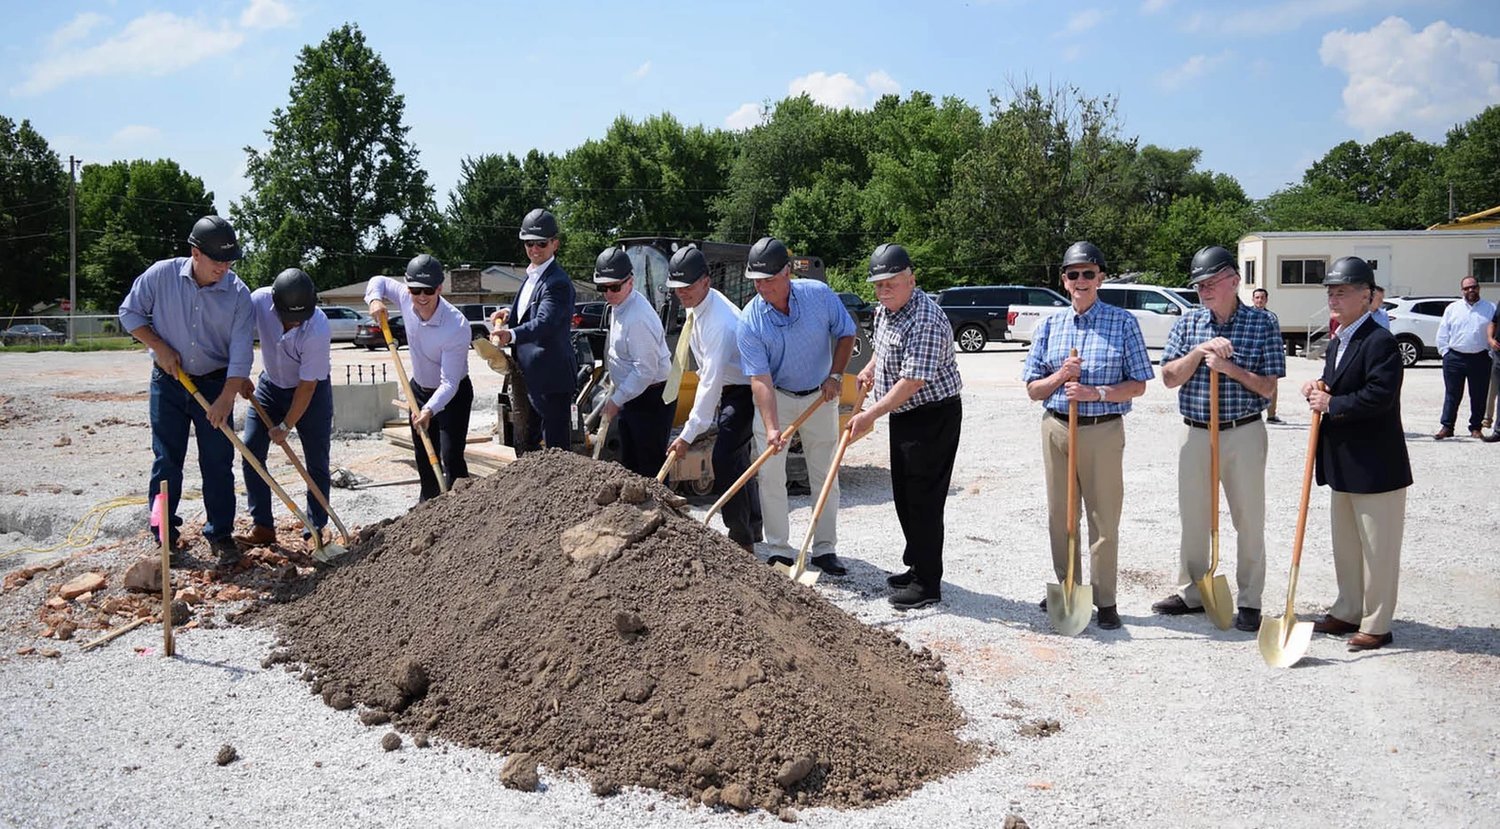 BANK ON IT
Officials participate in a June 16 groundbreaking ceremony for Legacy Bank & Trust Co.’s planned 40,000-square-foot headquarters at 3250 E. Sunshine St. Base Construction & Management LLC is general contractor for the project slated to wrap up in summer 2021. The site is a former Meek’s Lumber Co., which has been demolished. A city building permit lists a declared valuation of $5 million for the Legacy Bank building.